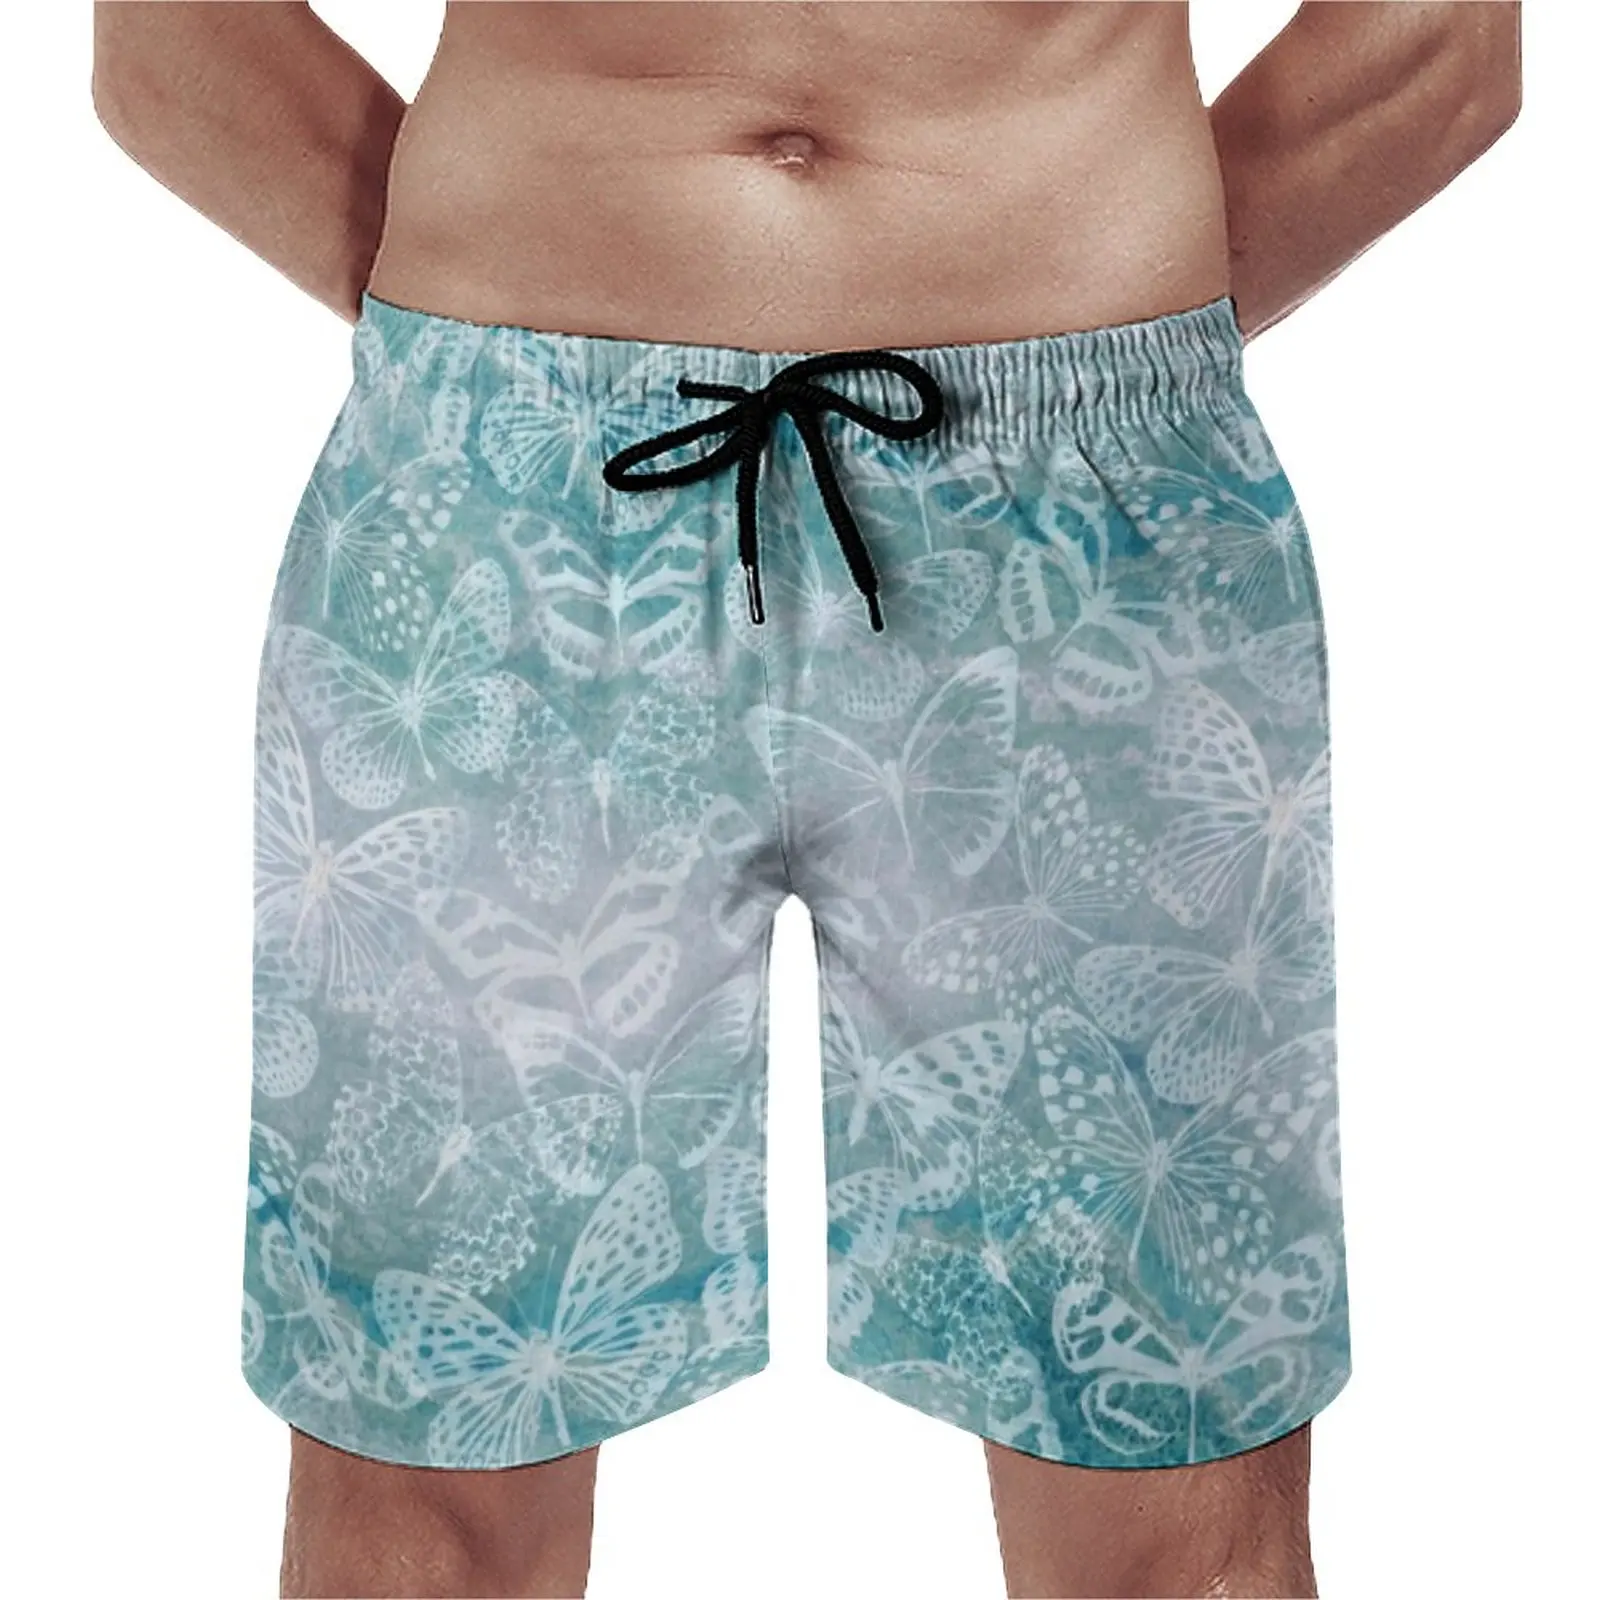 

Summer Board Shorts Marble Butterfly Surfing Animal Print Design Beach Short Pants Retro Quick Dry Swimming Trunks Plus Size